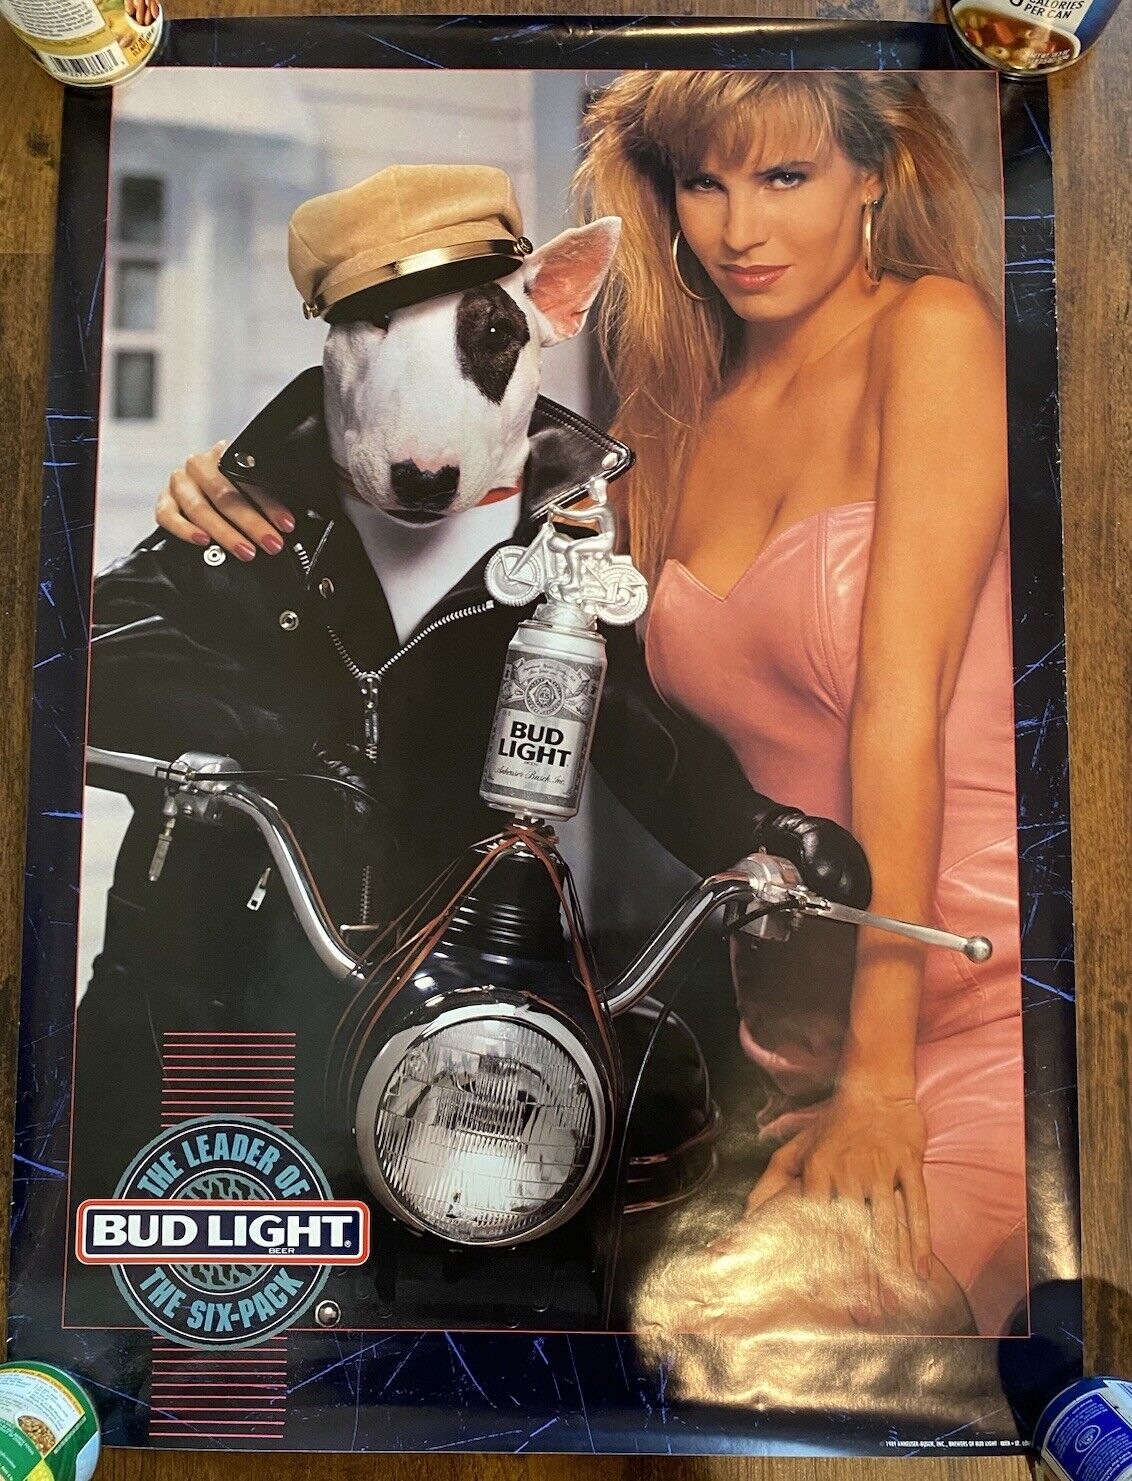 Vtg 1989 Spuds Mackenzie Poster The Leader Of The Six-Pack Bud Light Motorcycle